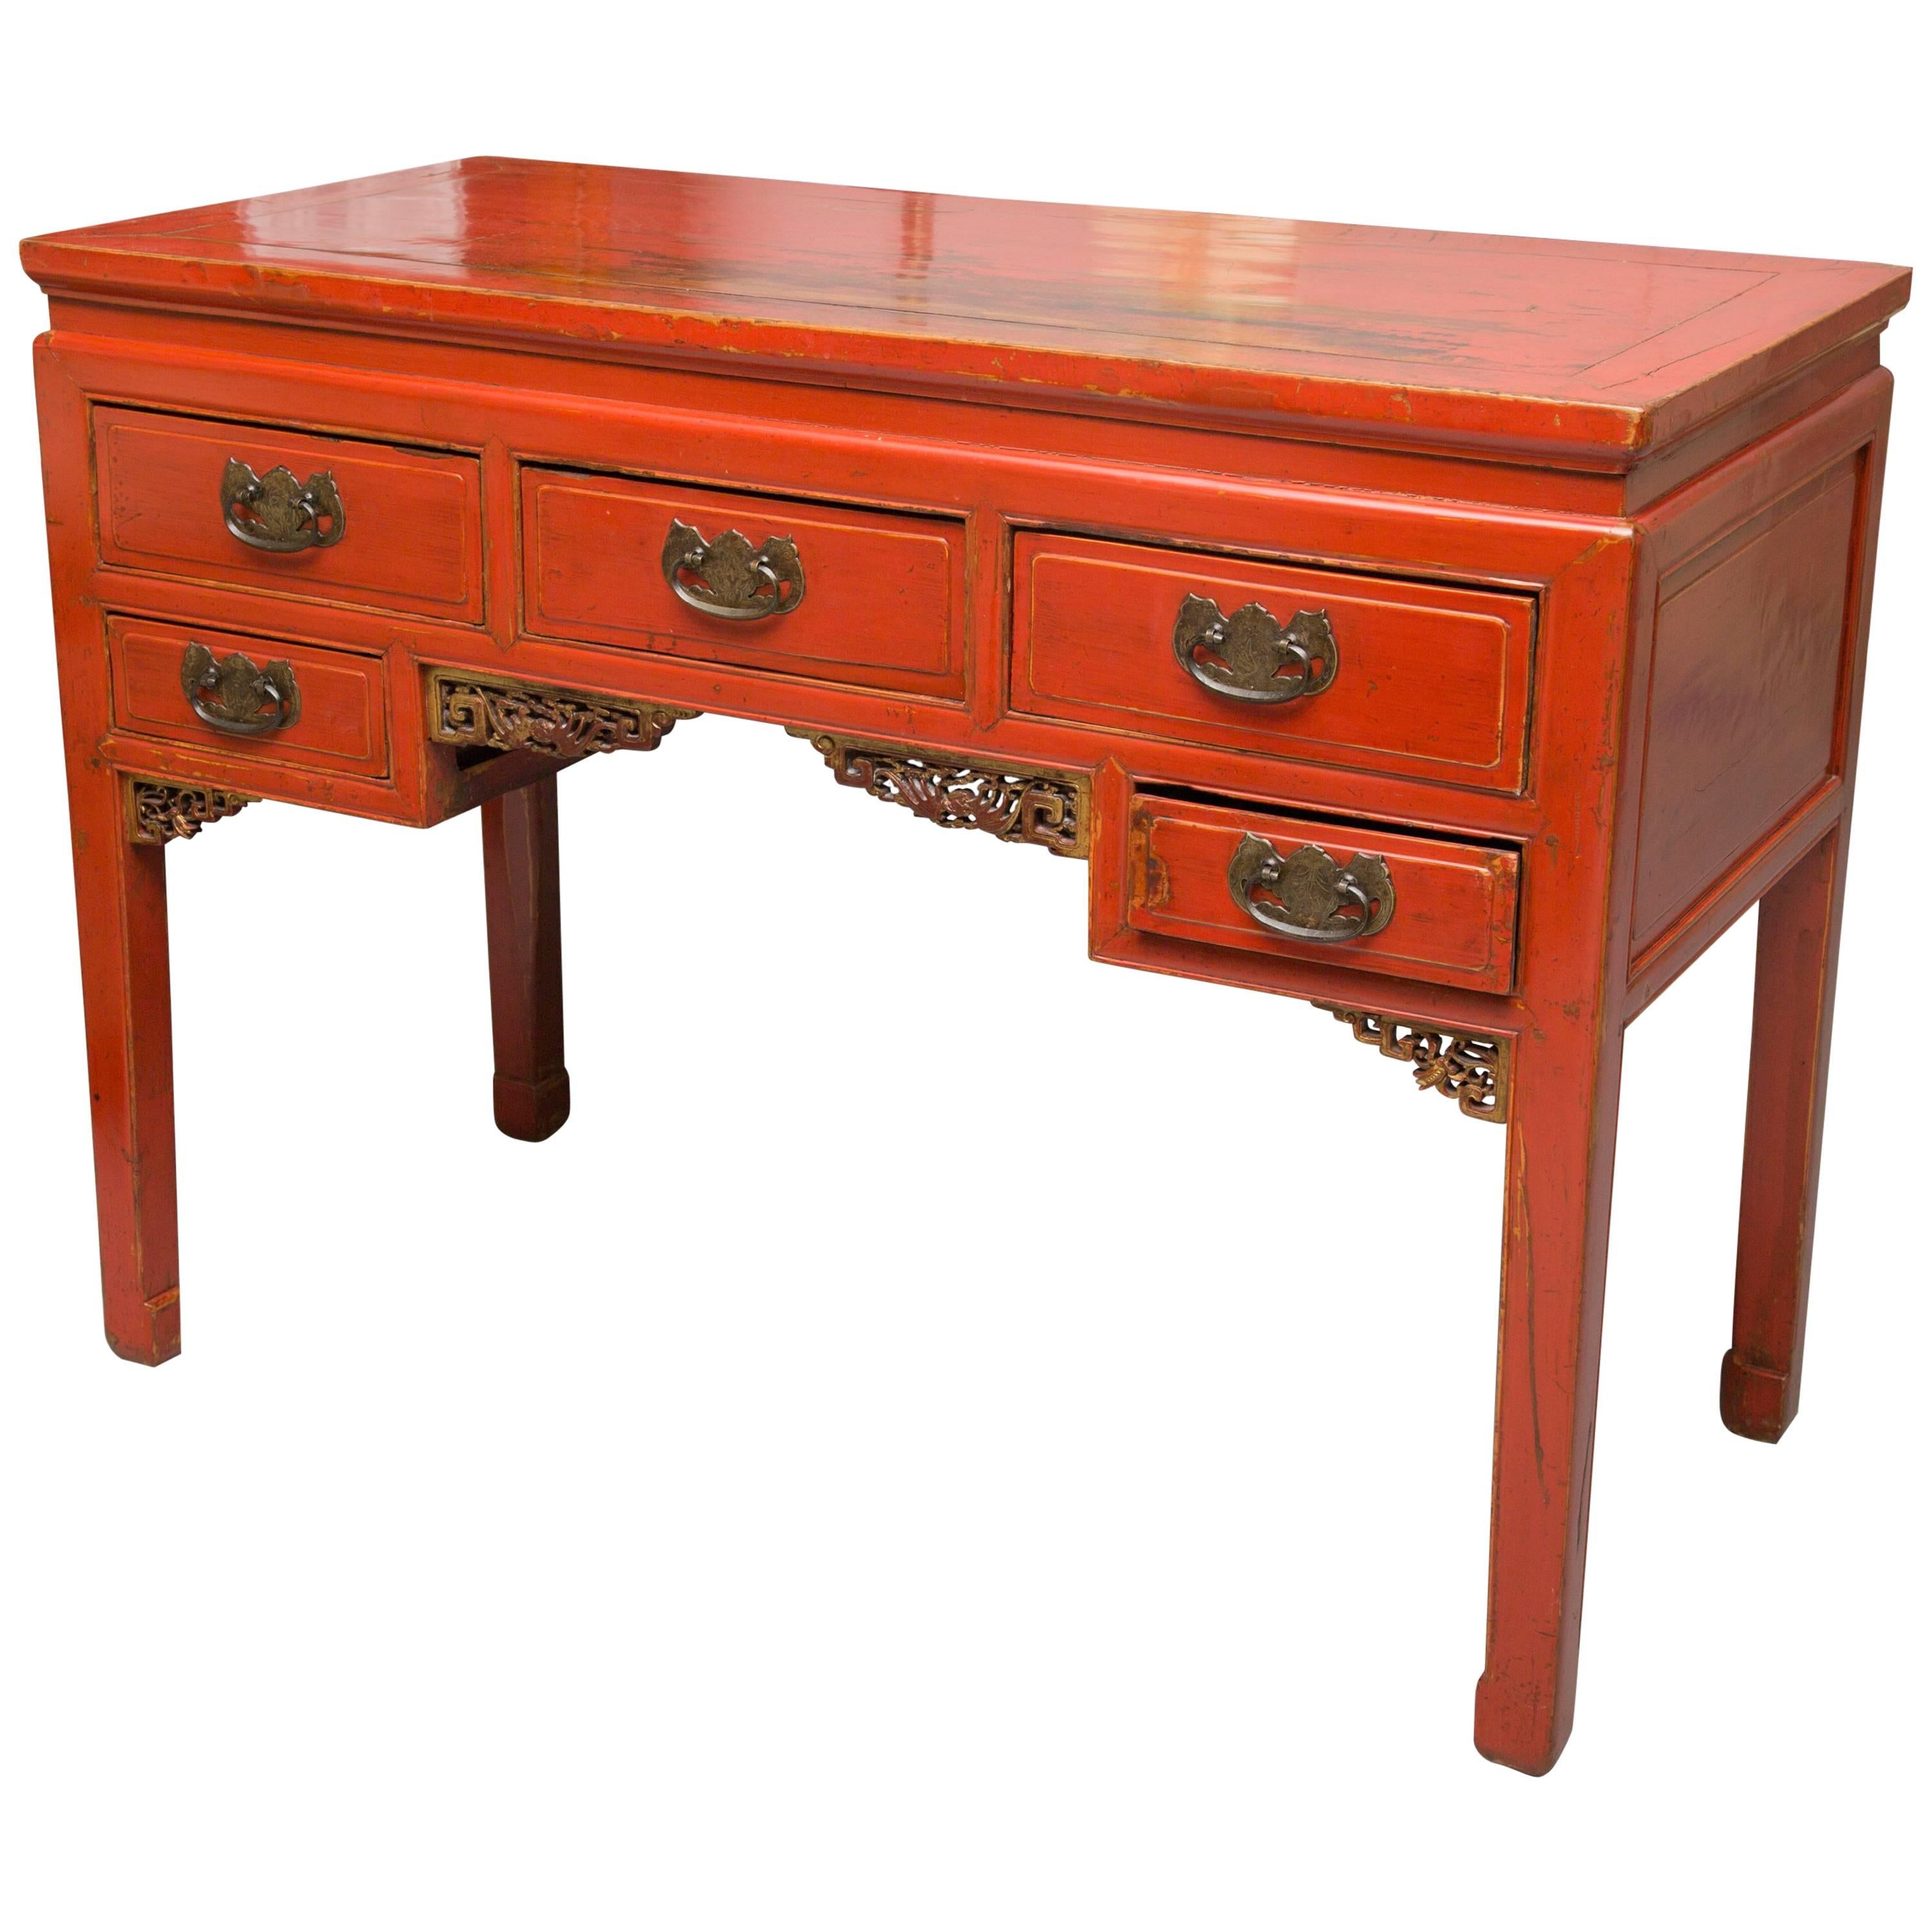 Red-Painted Chinese Console Table